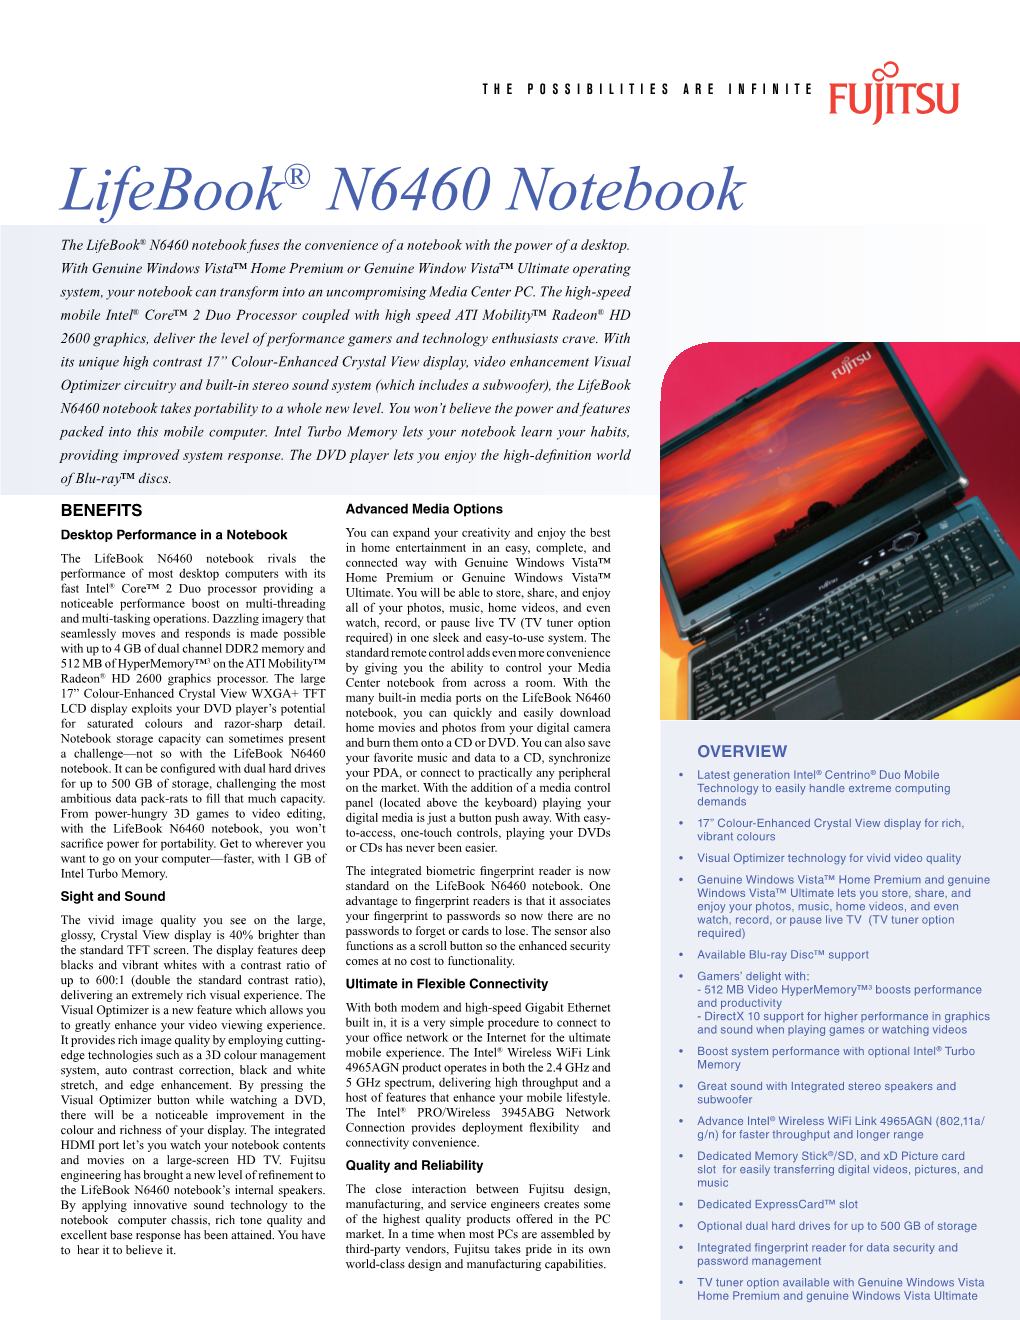 Lifebook® N6460 Notebook the Lifebook® N6460 Notebook Fuses the Convenience of a Notebook with the Power of a Desktop